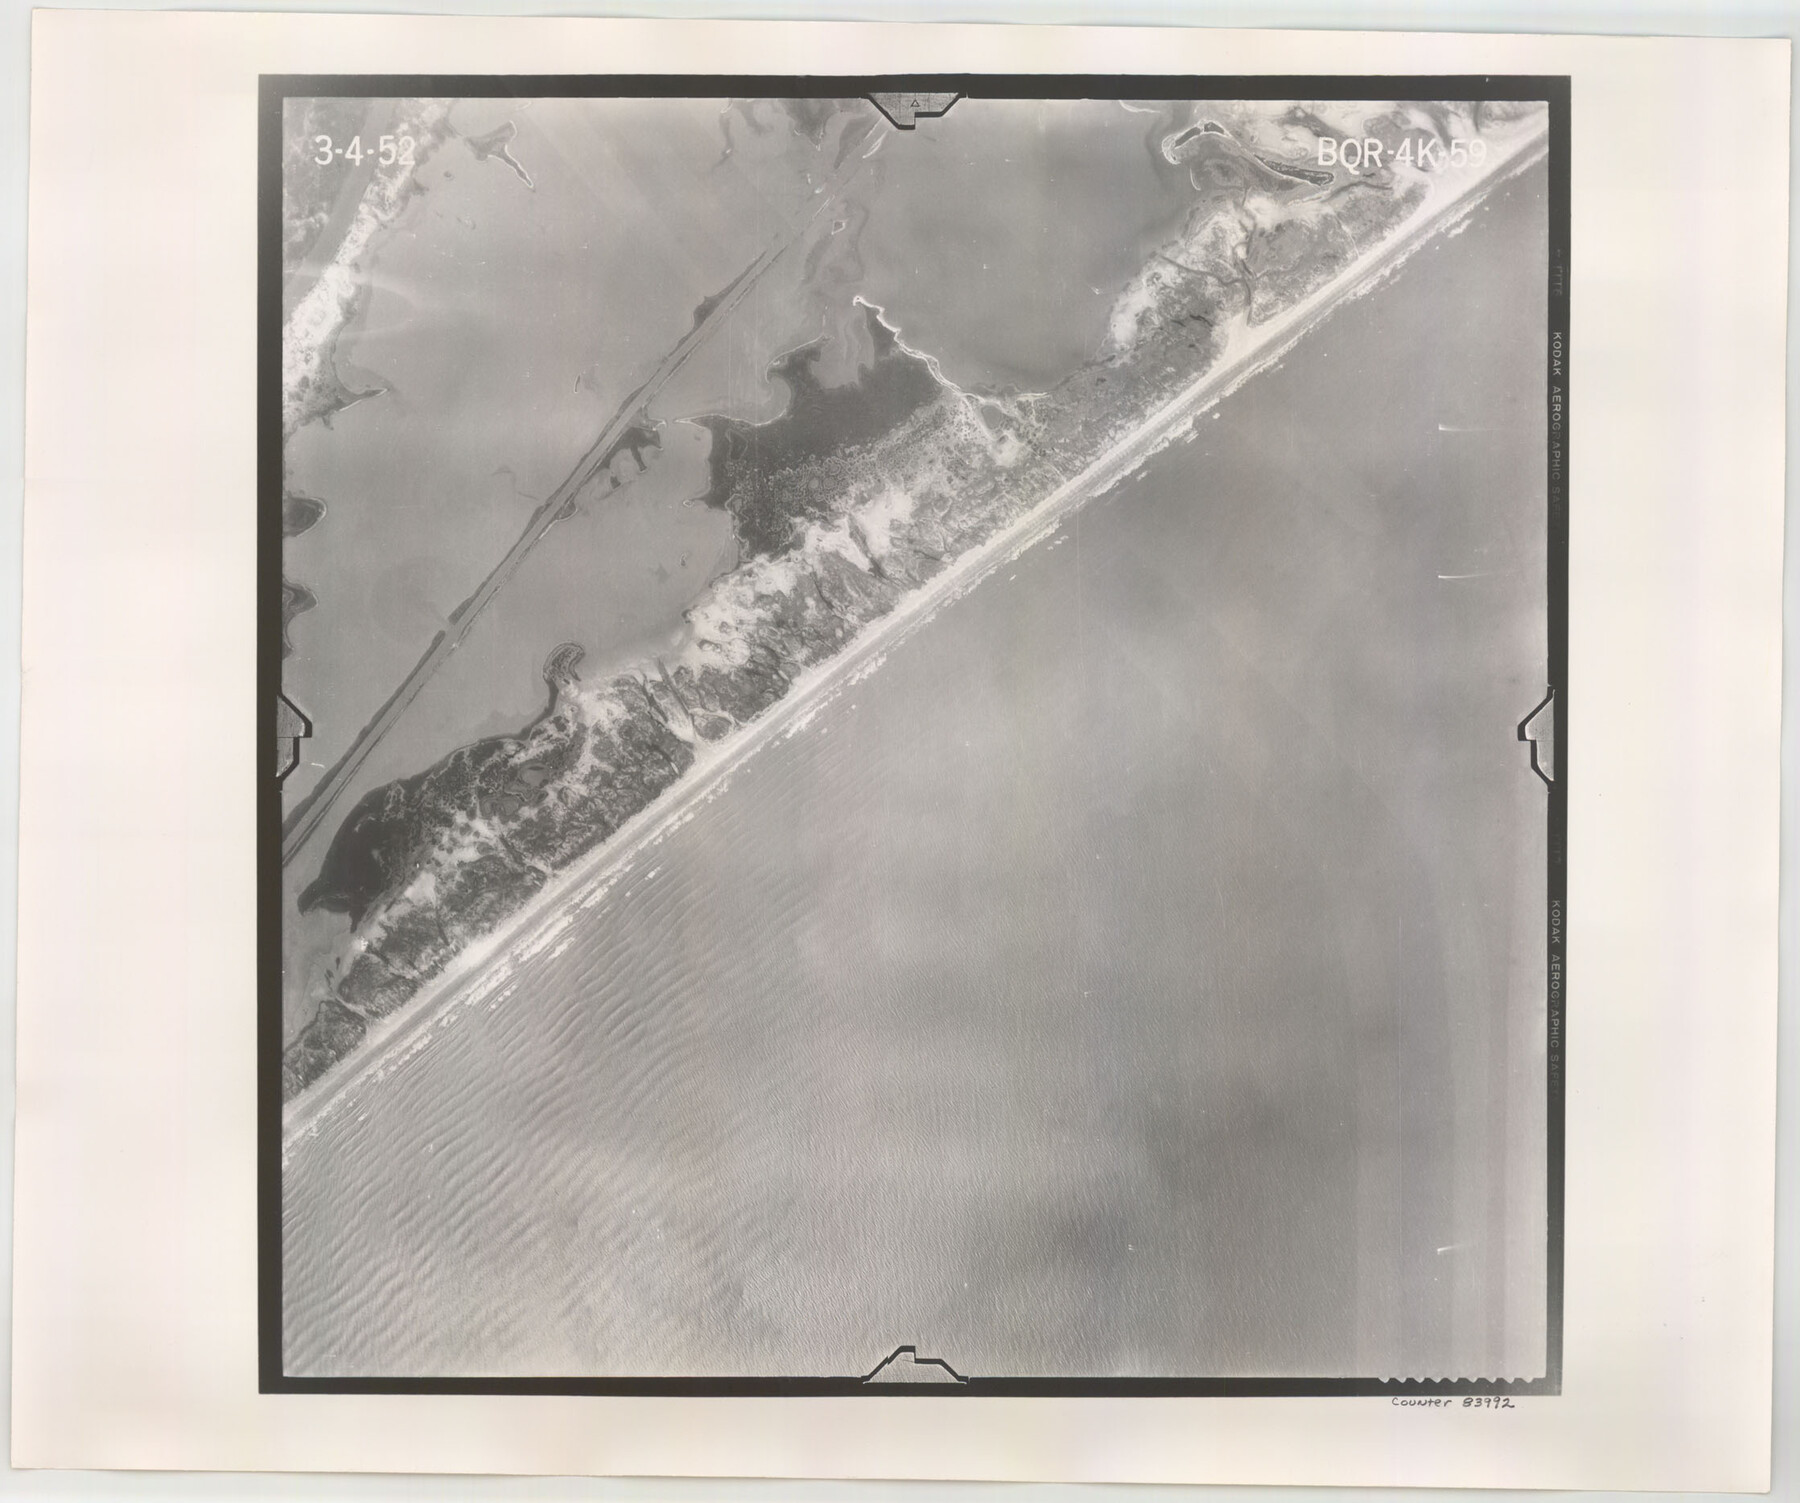 83992, Flight Mission No. BQR-4K, Frame 59, Brazoria County, General Map Collection